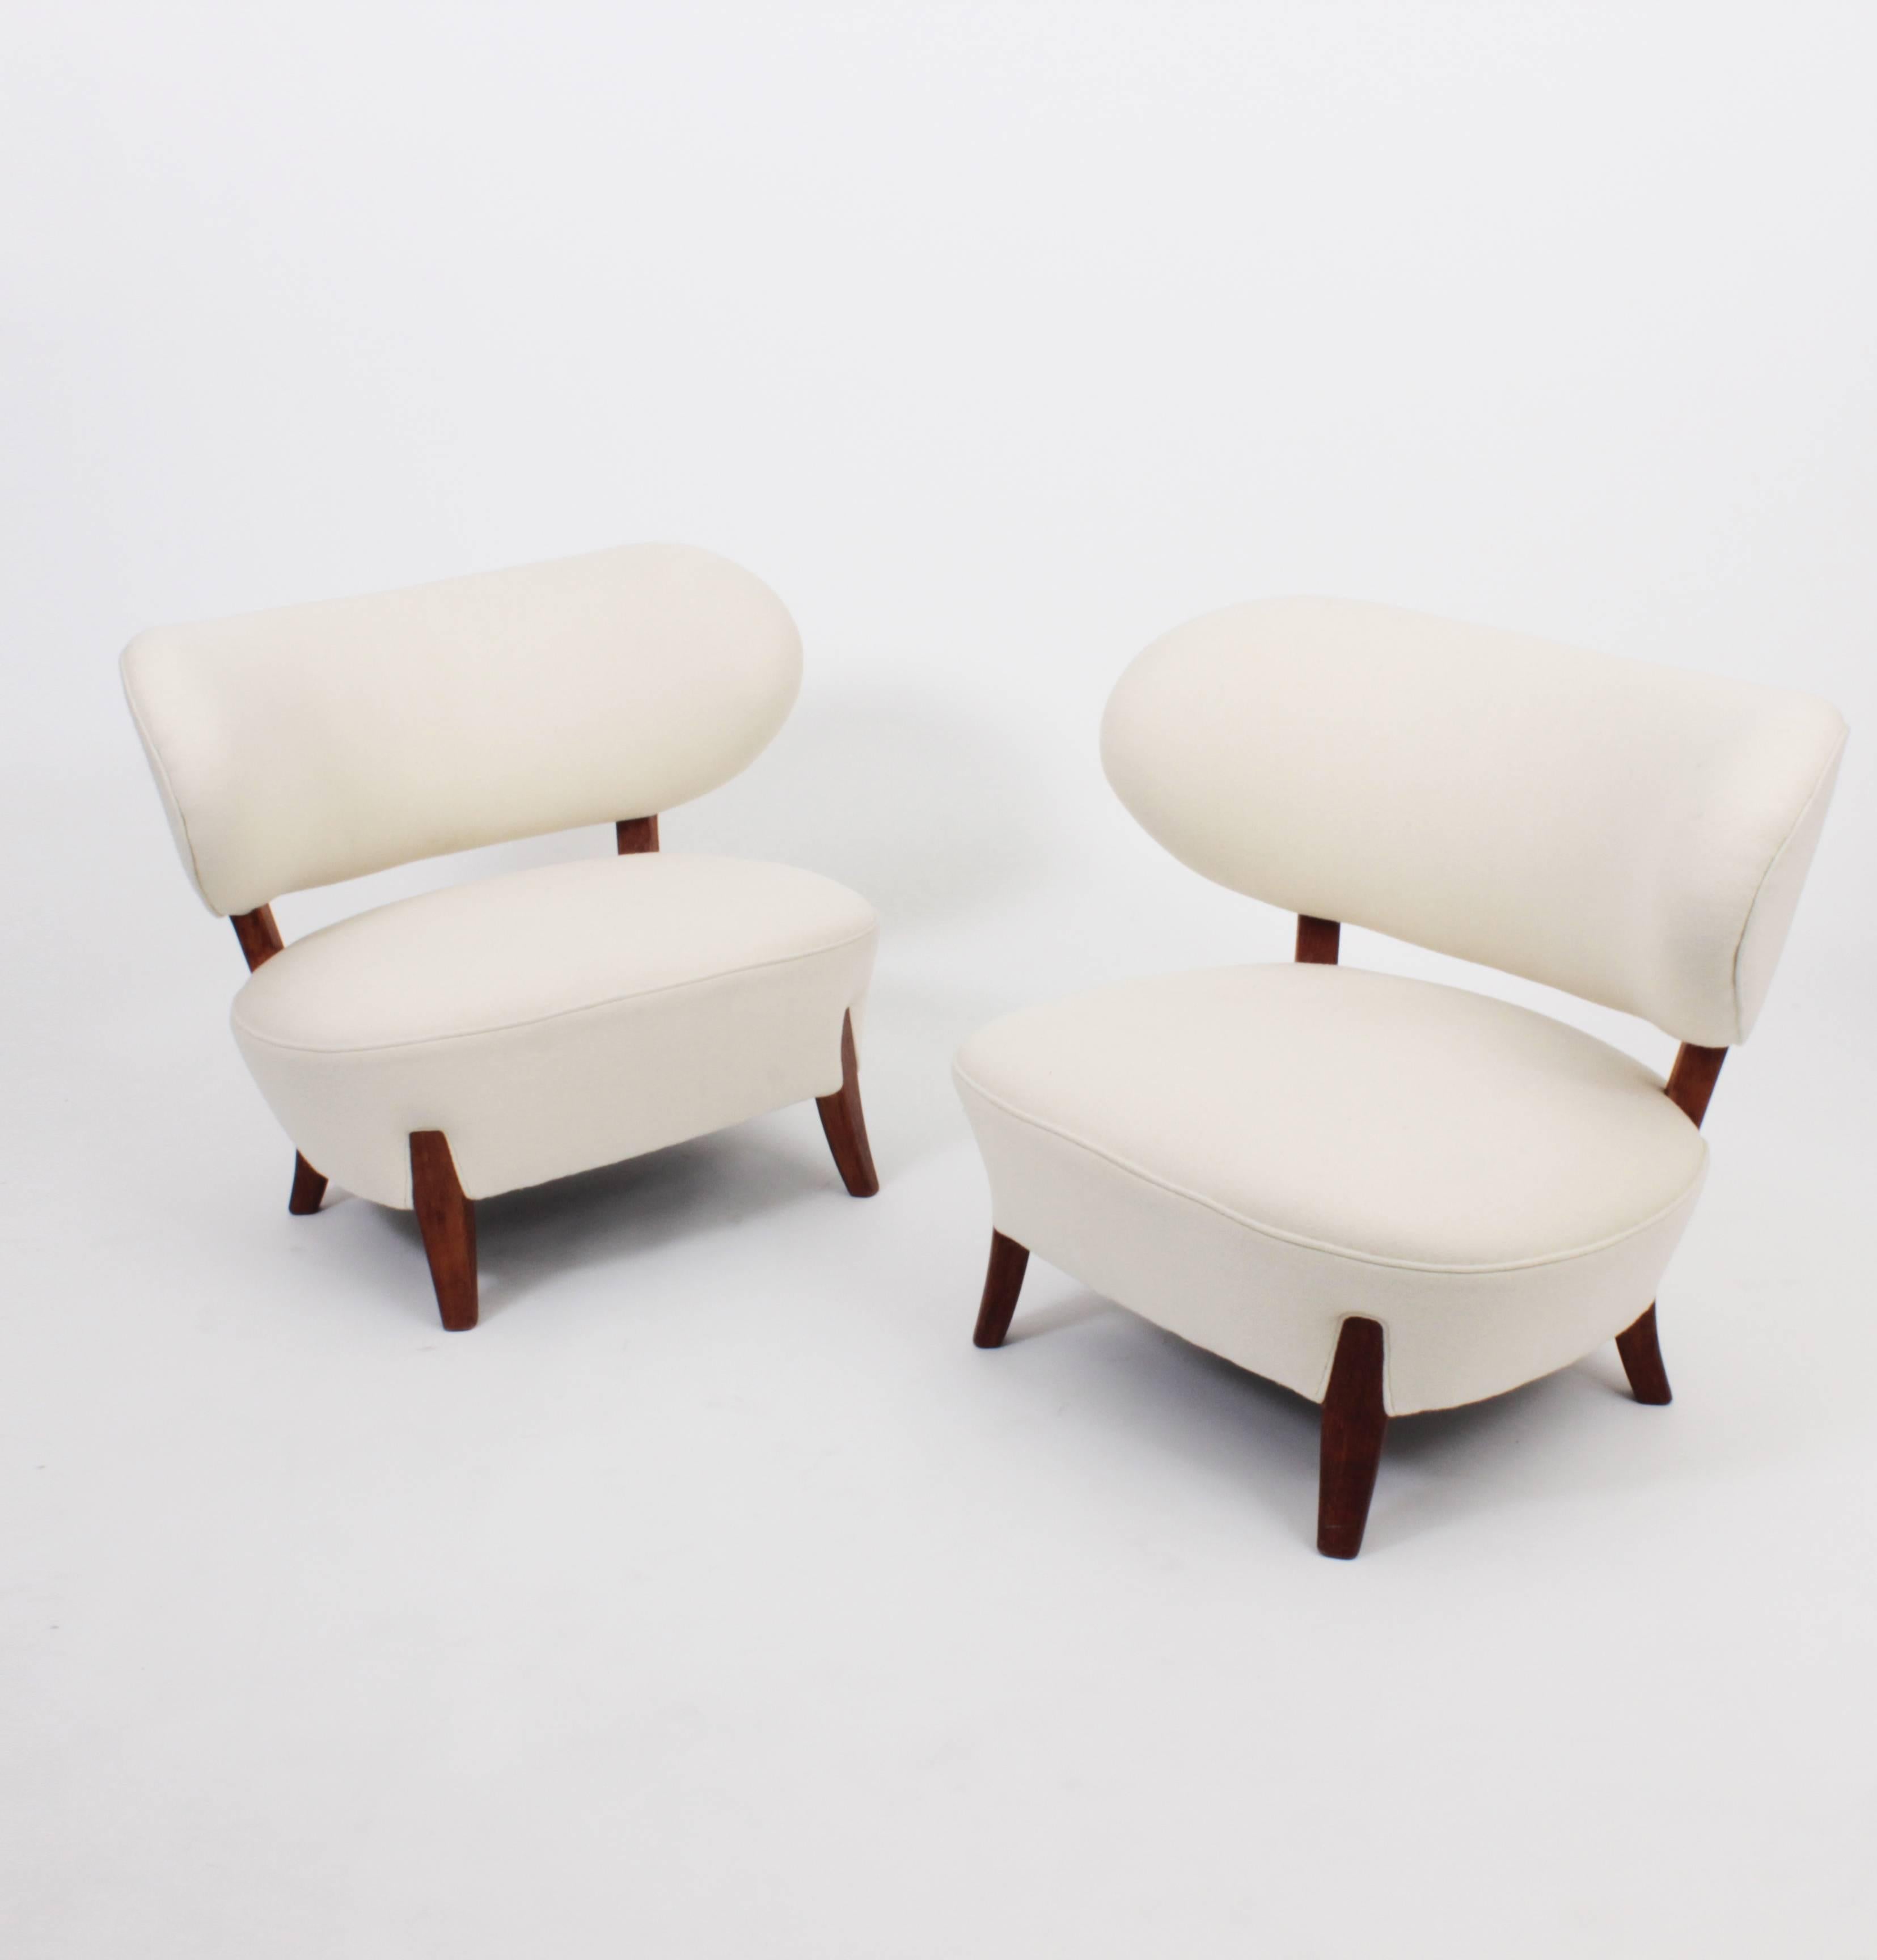 Swedish Pair of Otto Schulz Easy Chairs for Boet, Sweden, circa 1940